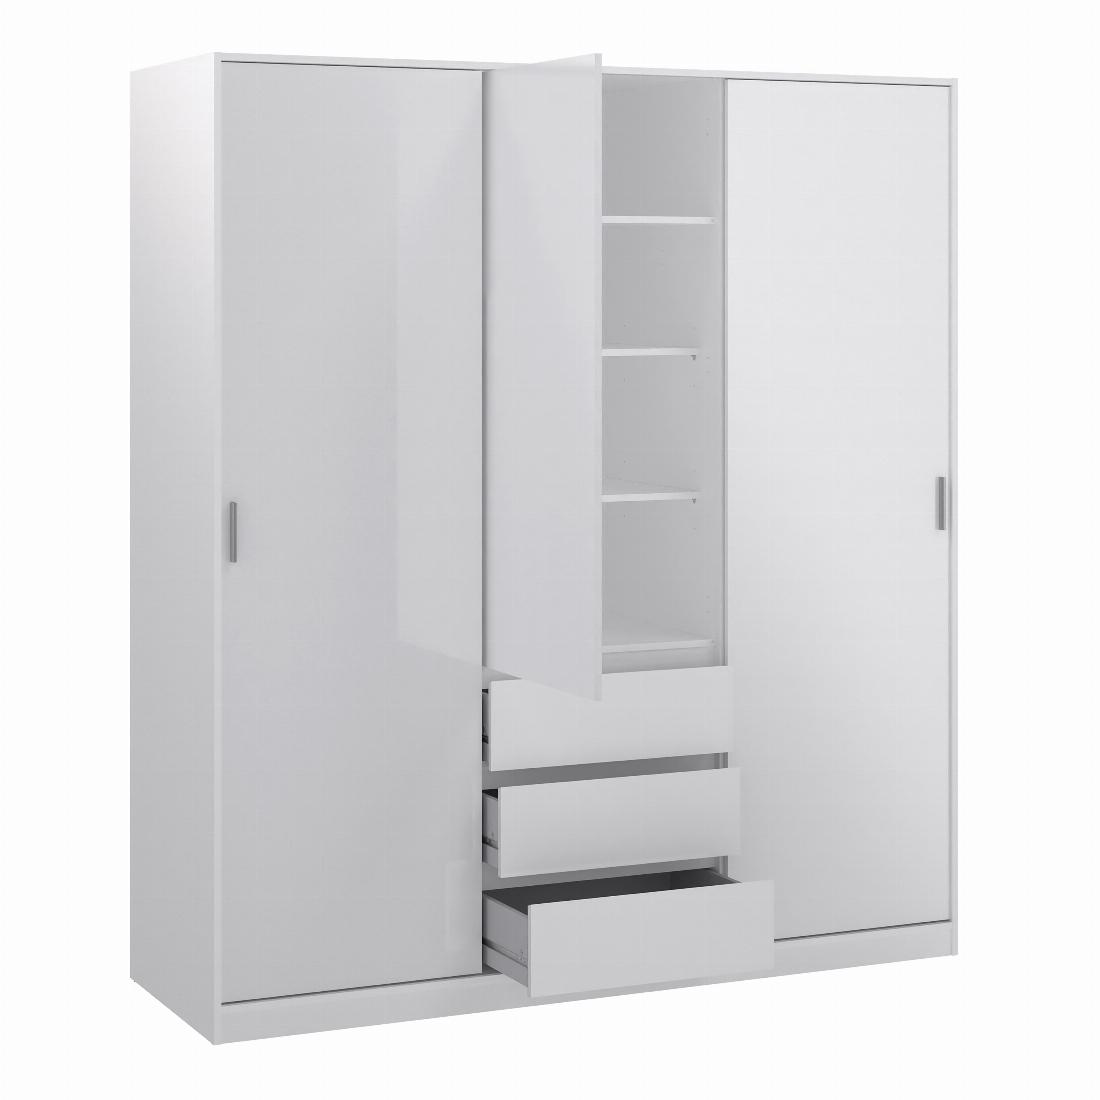 Naia Wardrobe with 2 sliding doors + 1 door + 3 drawers in White High Gloss